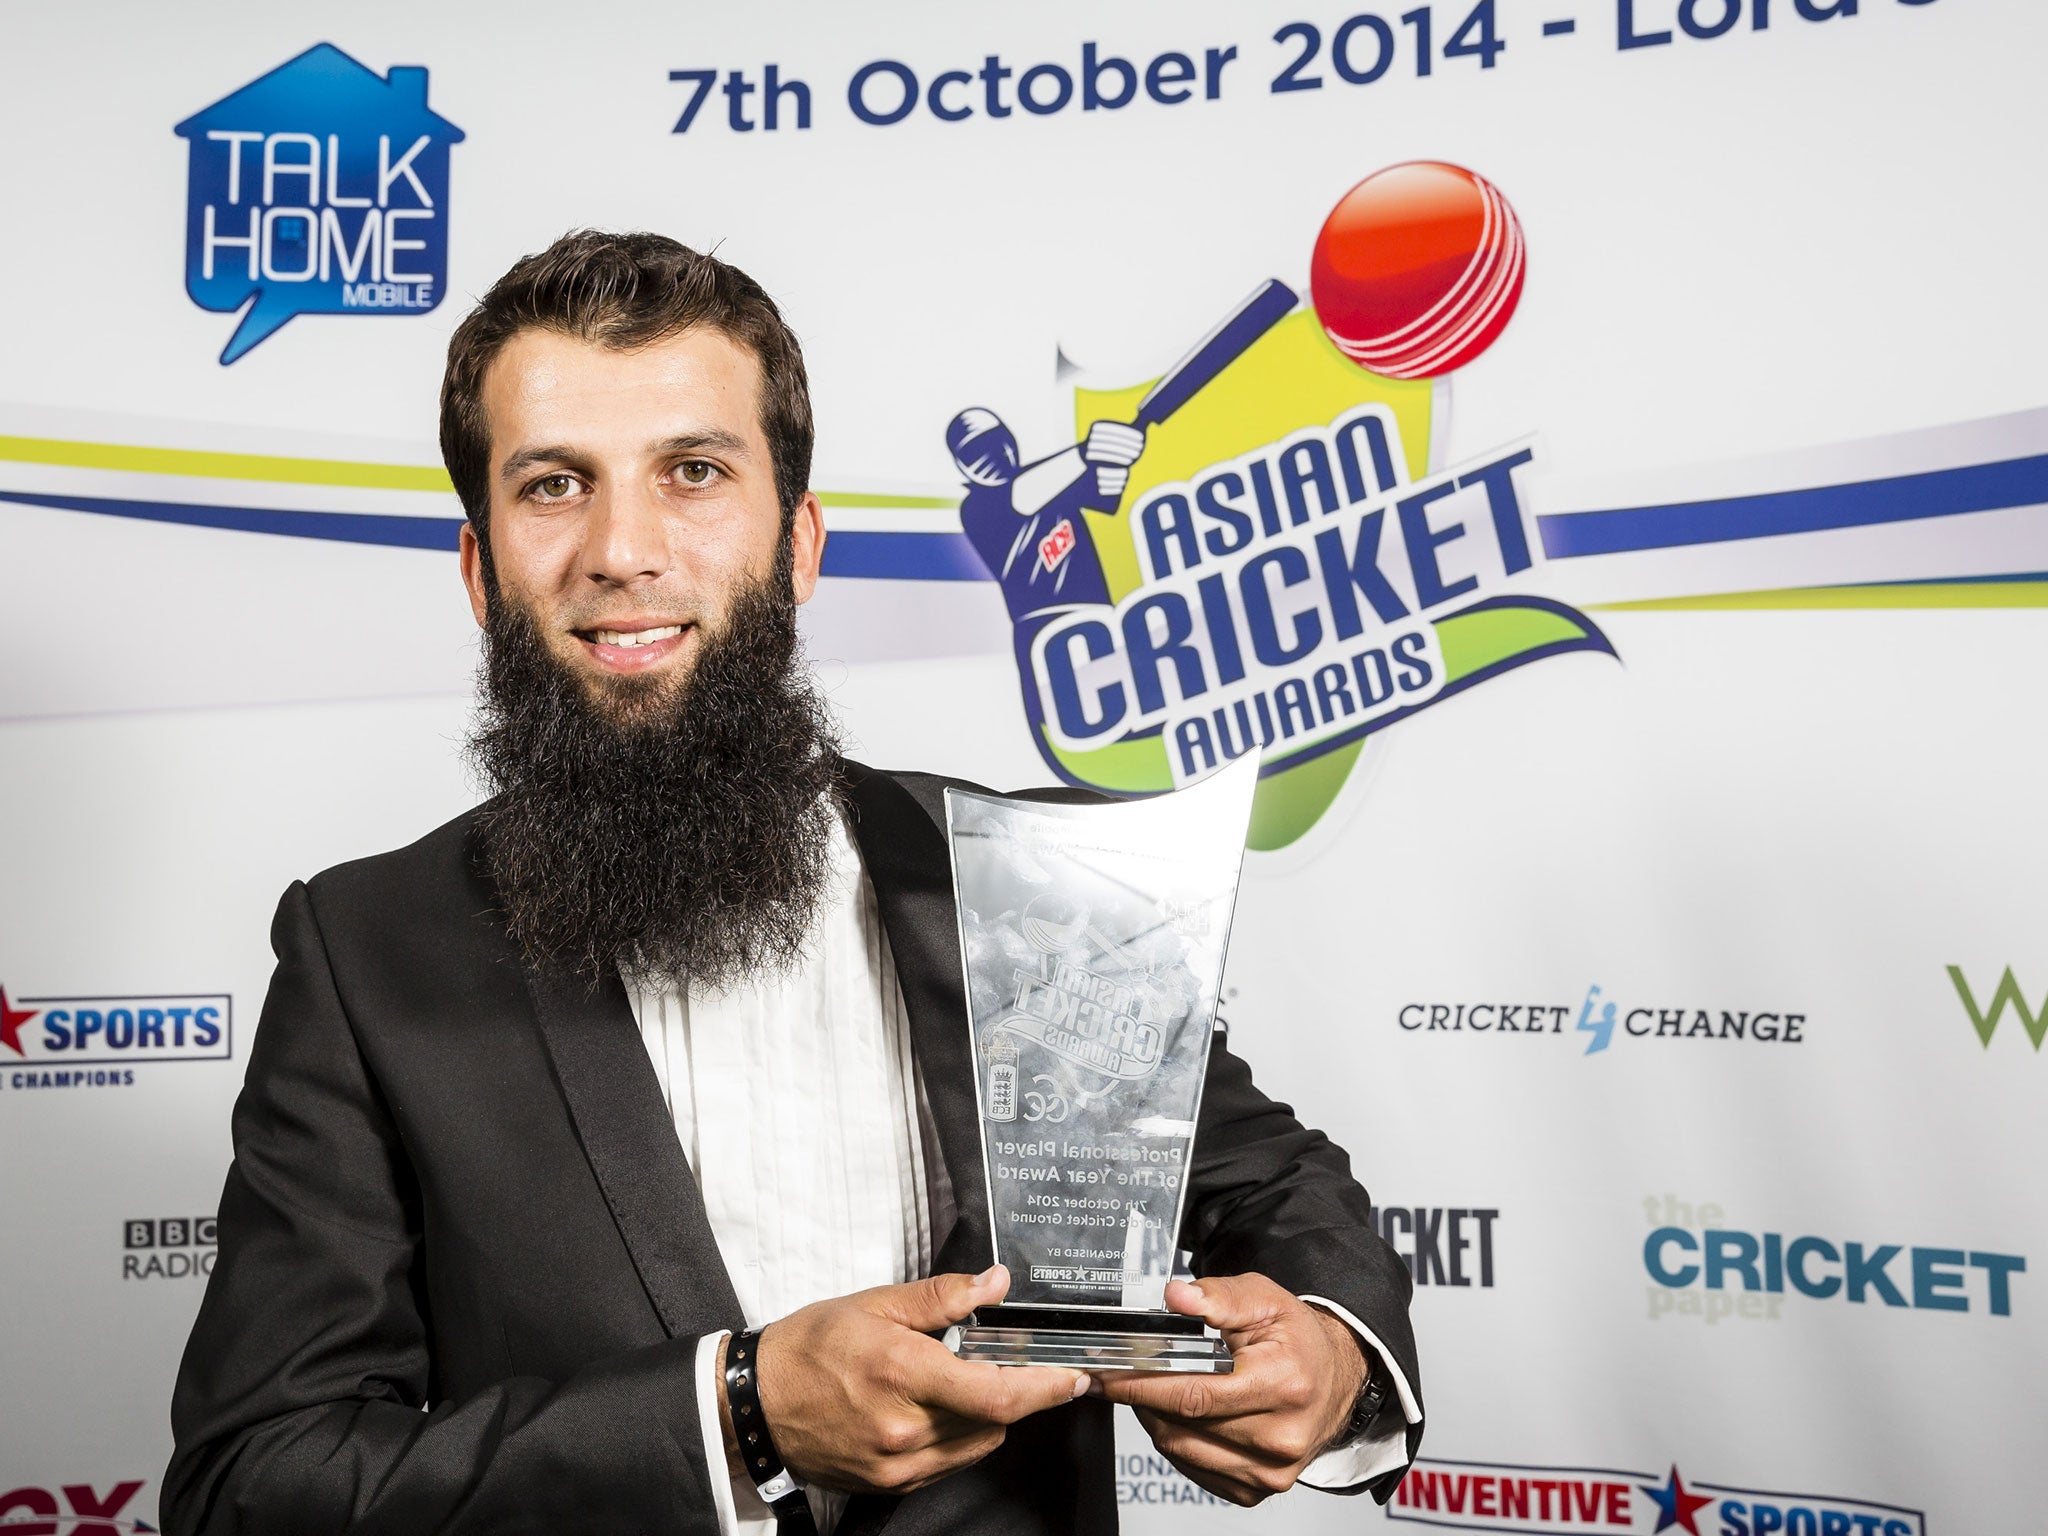 Moeen Ali, winner of the Professional Player of the Year award, poses with the trophy during the Asian Cricket Awards at Lord's